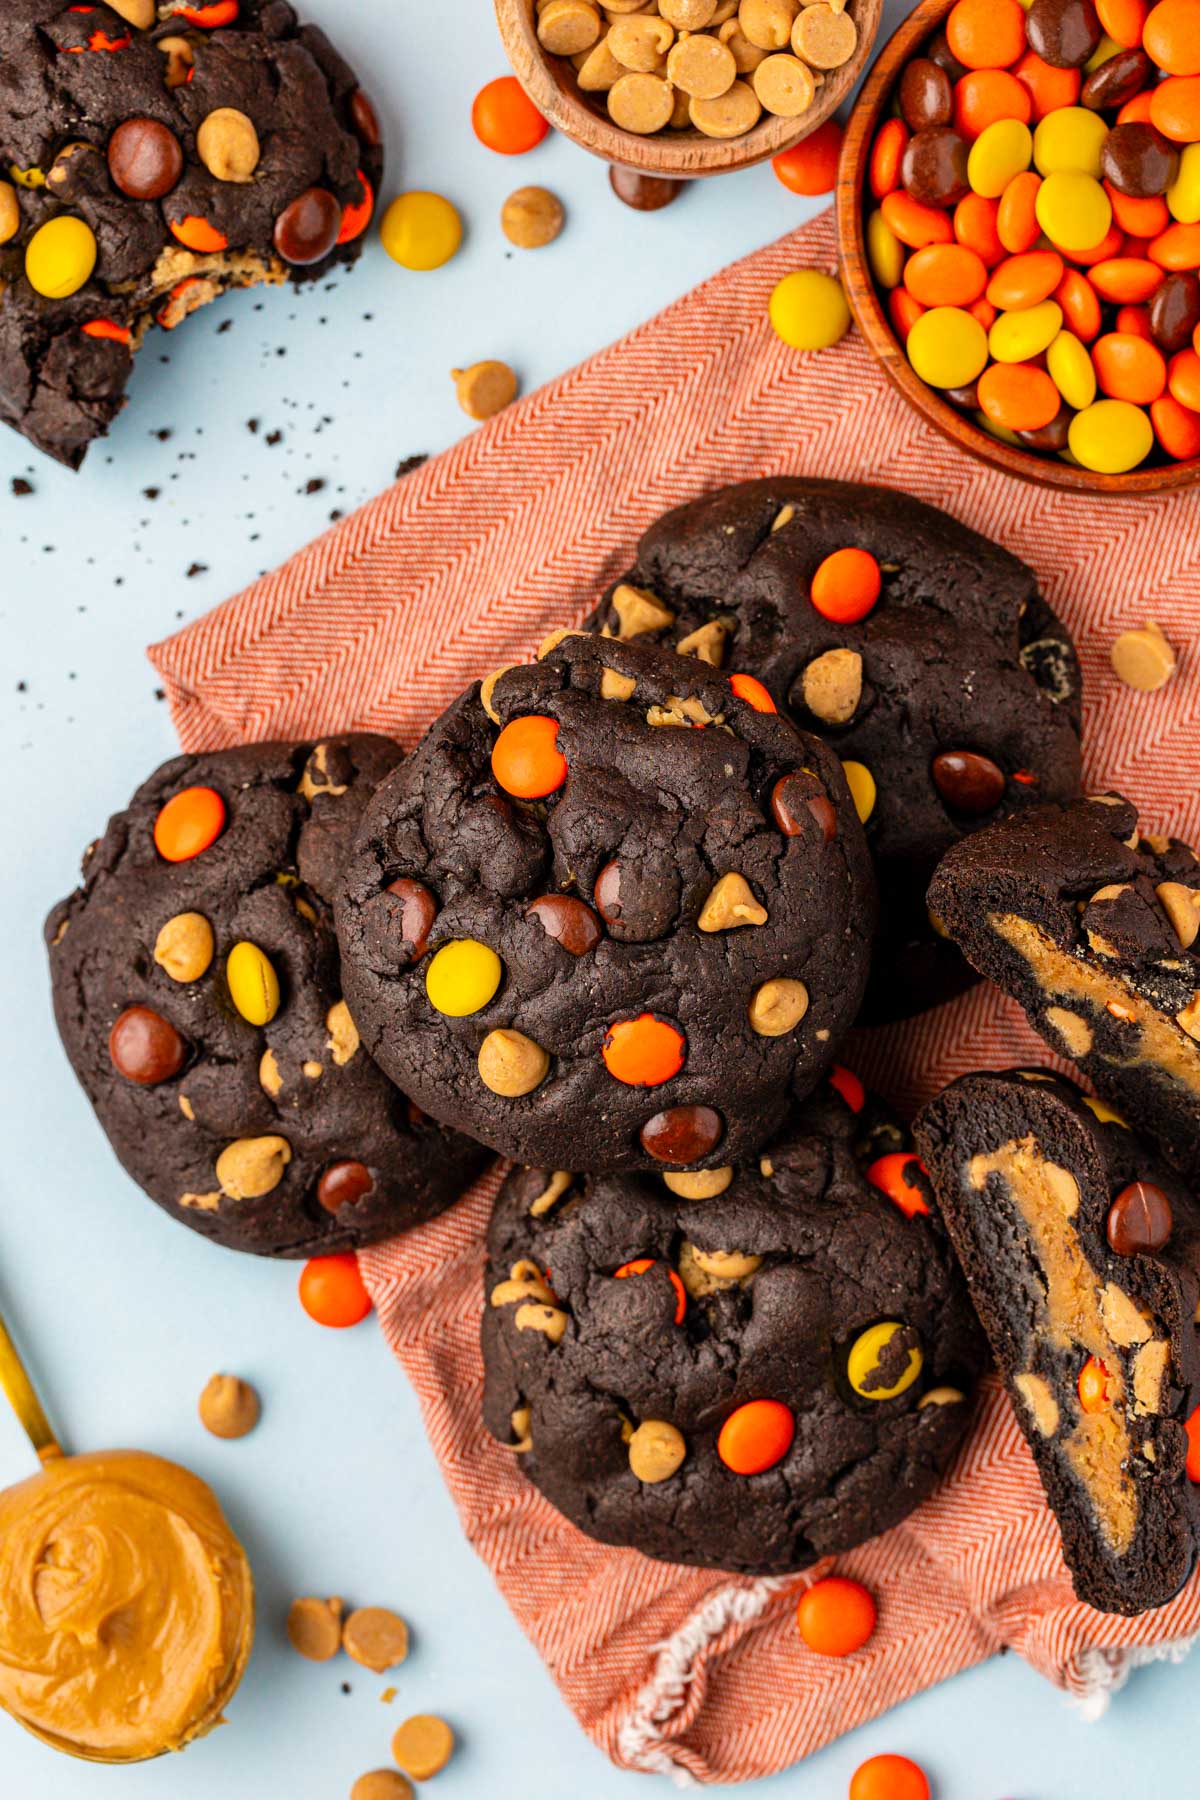 Overhead photo of chocolate cookies with peanut butter and Reese's Pieces.